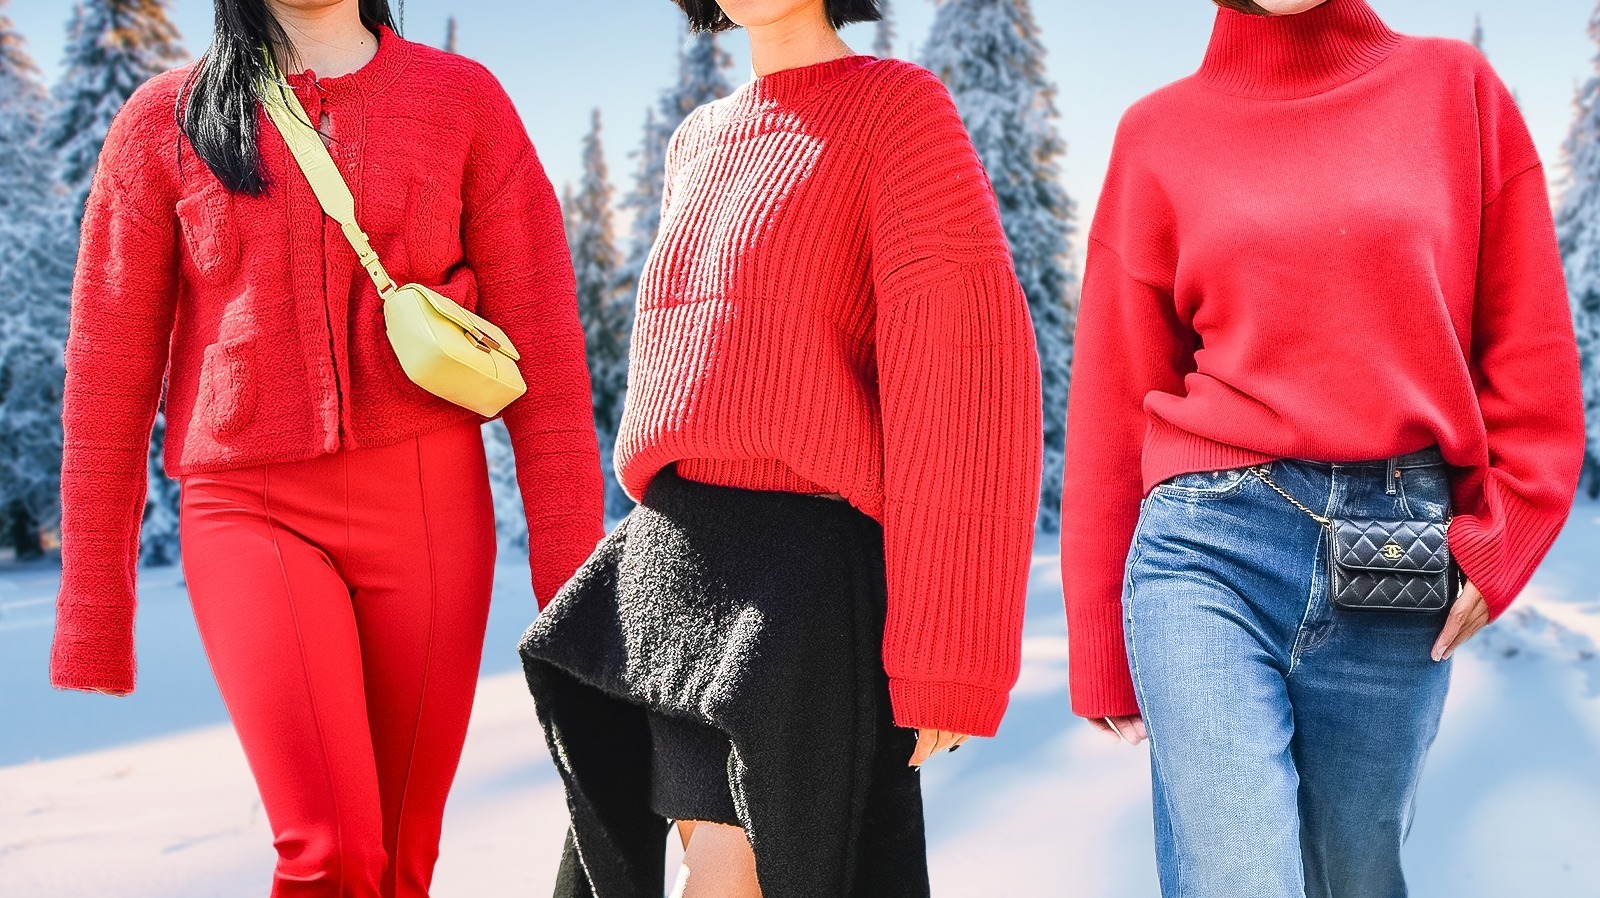 https://www.glam.com/img/gallery/the-red-sweater-is-winter-2024s-most-important-staple-piece/l-intro-1698332544.jpg